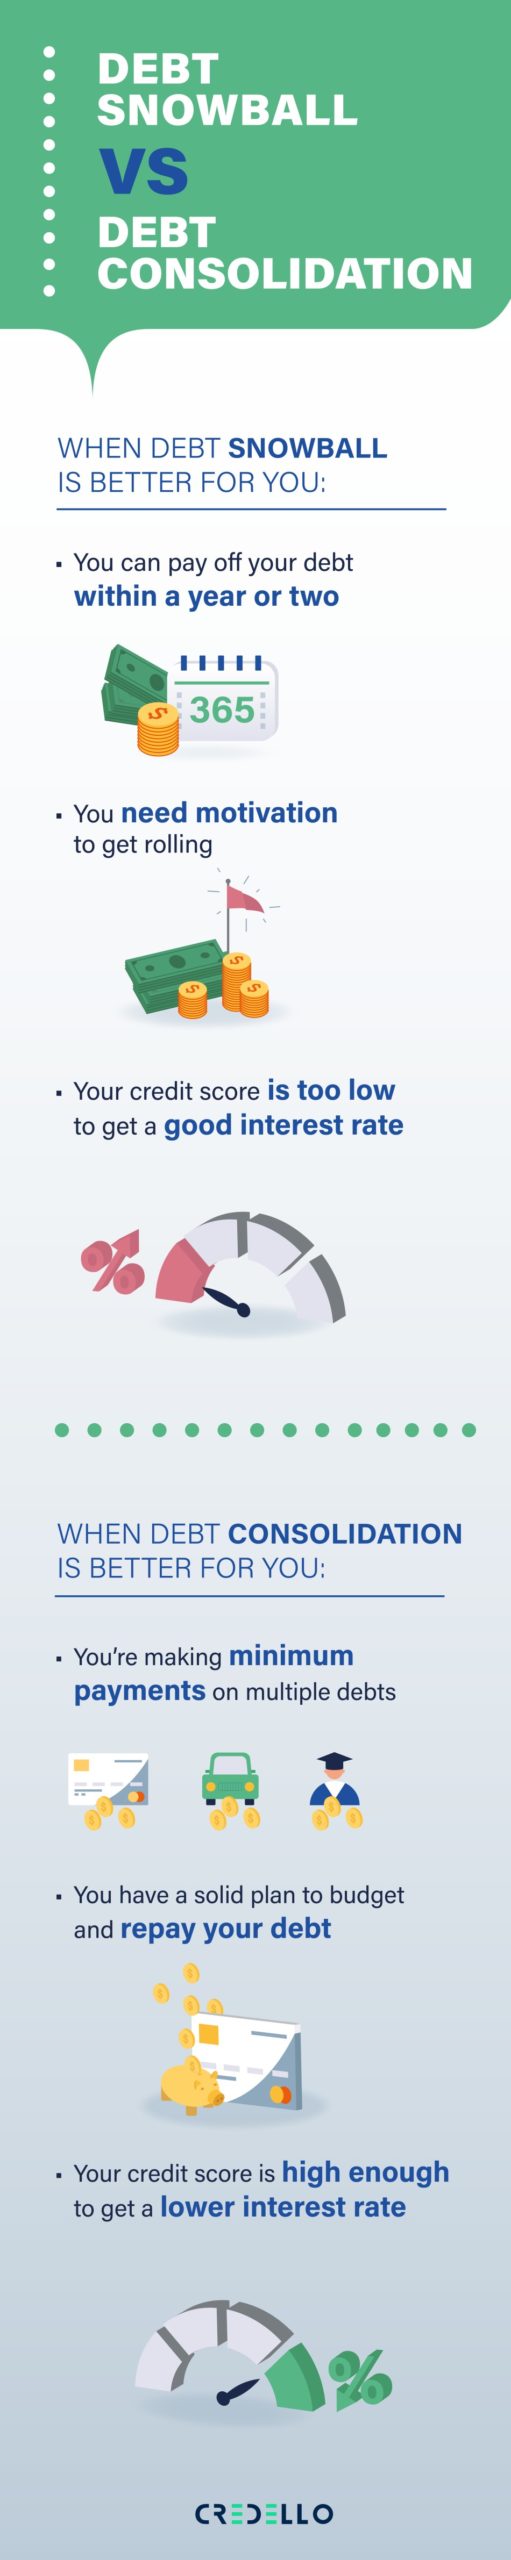 Which is best fit for your financial needs? debt snowball or debt consolidation